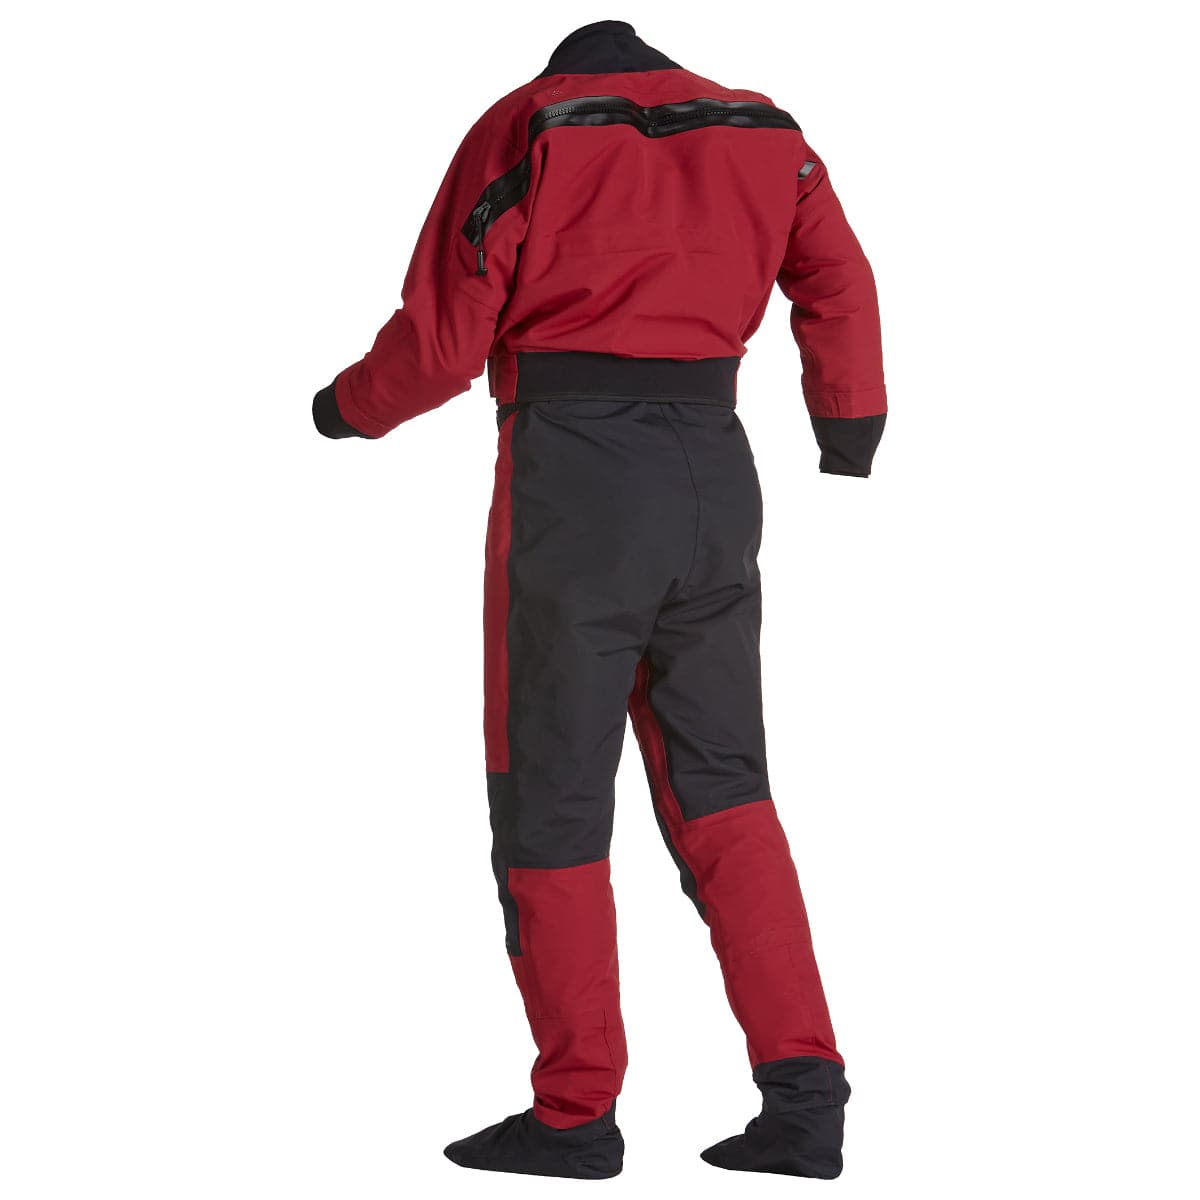 Featuring the Devils Club Drysuit men's dry wear manufactured by Immersion Research shown here from a fourth angle.